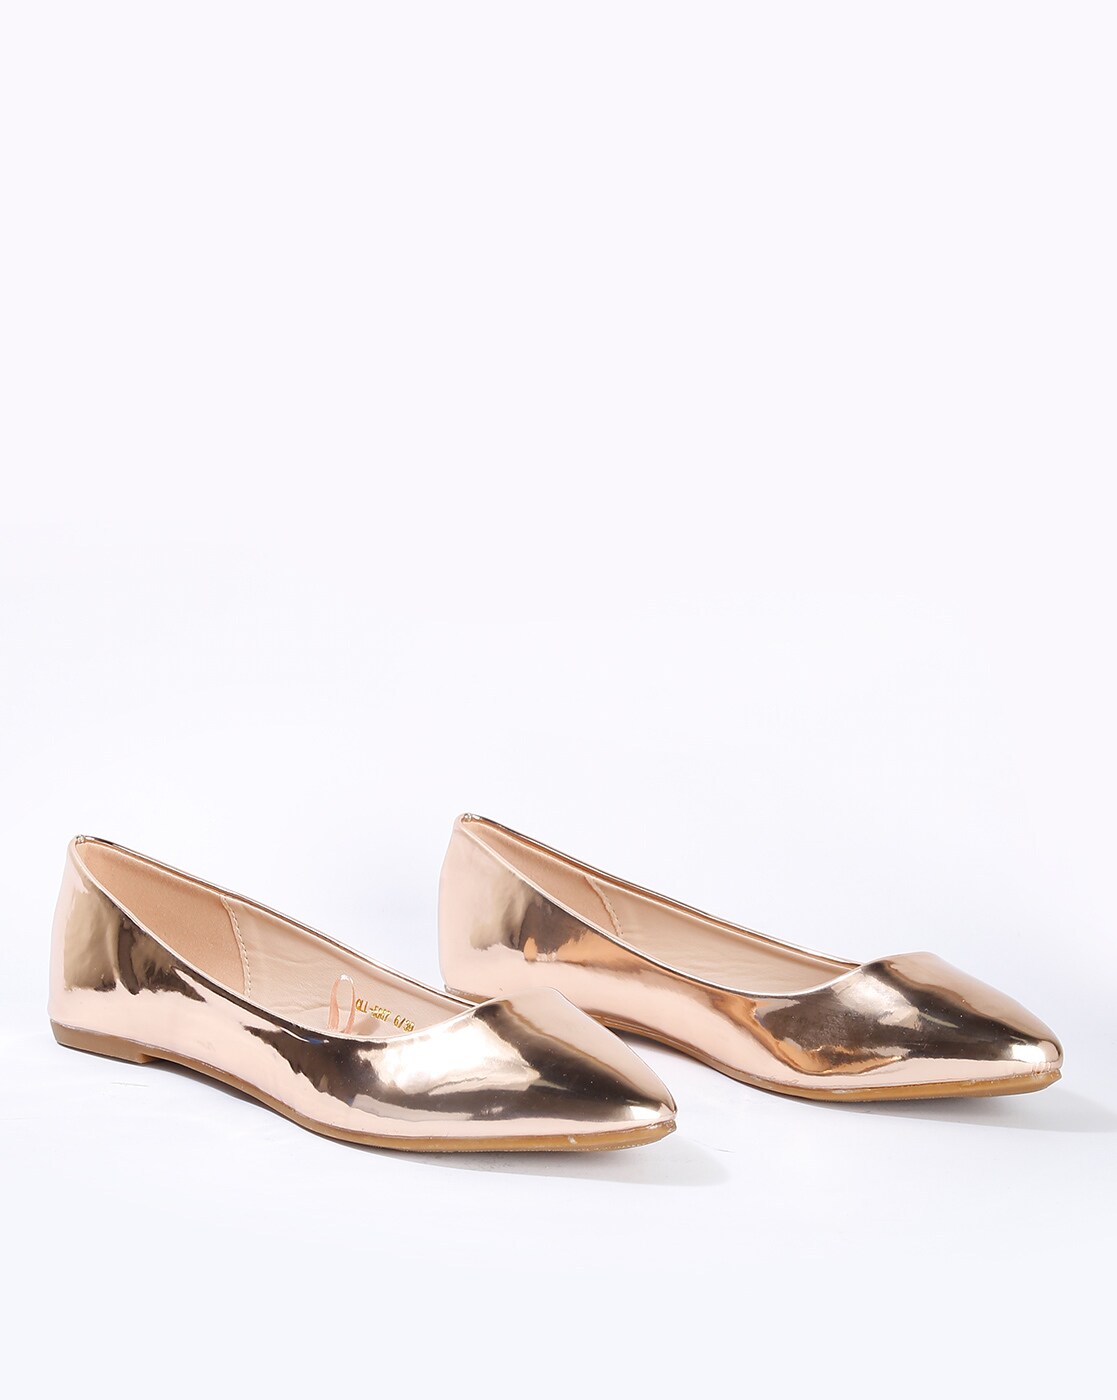 gold pointed toe flats